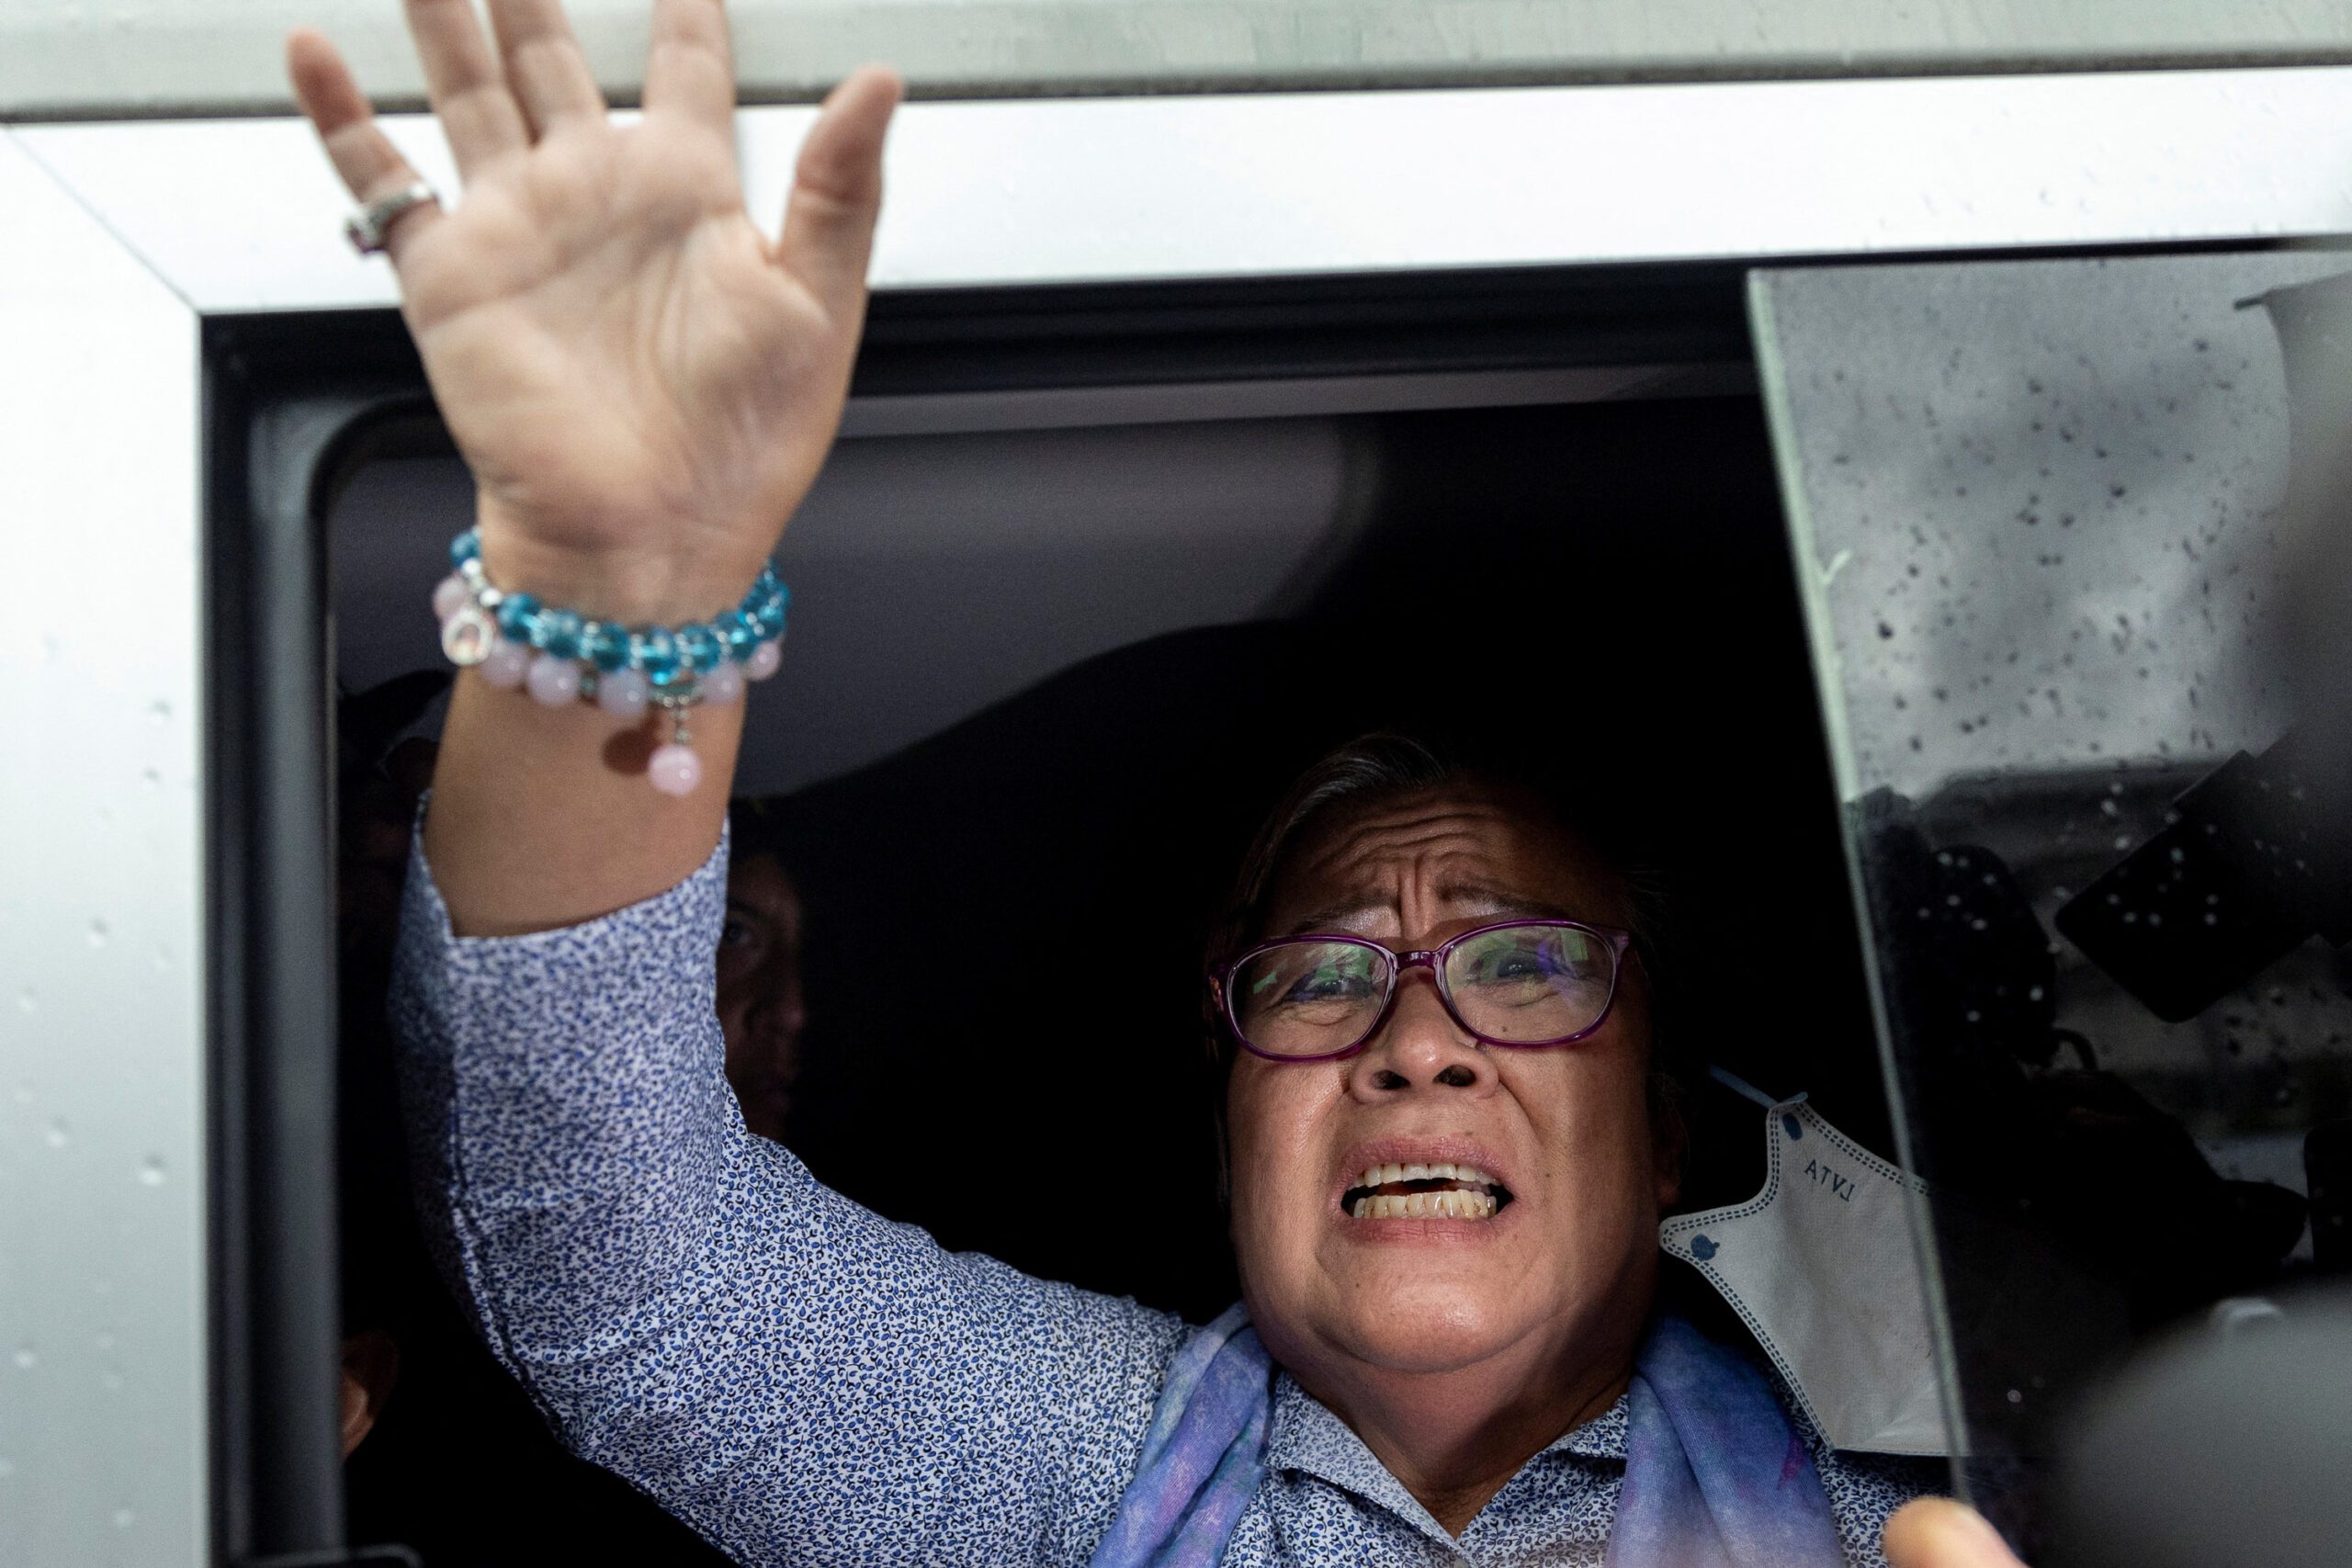 Inside Camp Crame and the courtroom: De Lima’s anxiety and joy